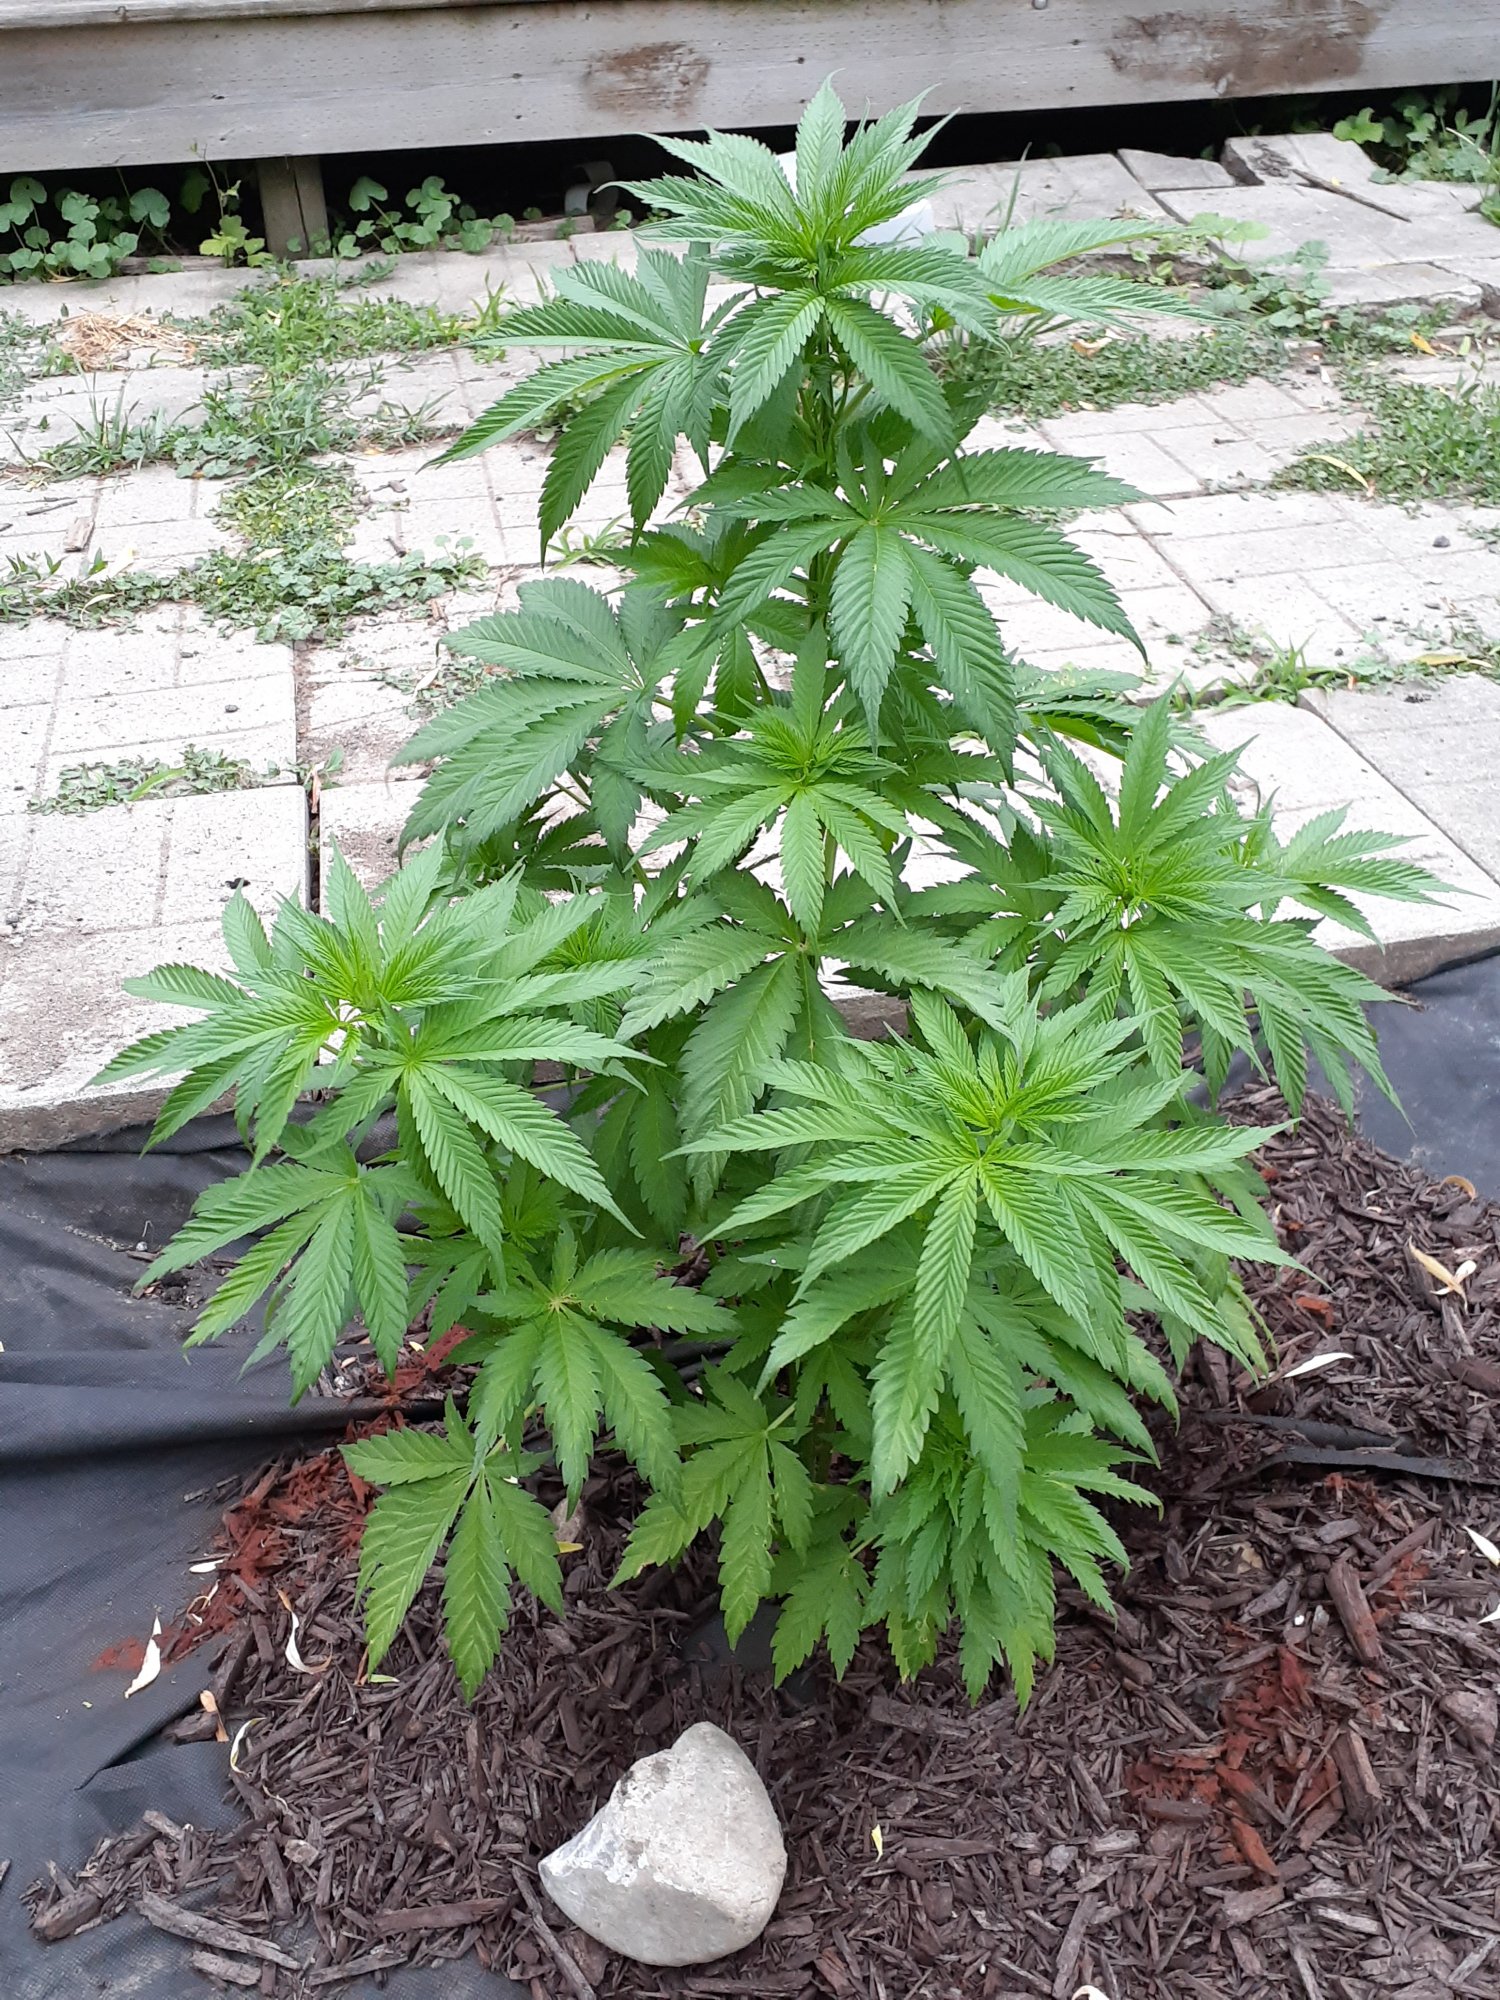 Hungry ph issues or heatpest stress outdoor 4